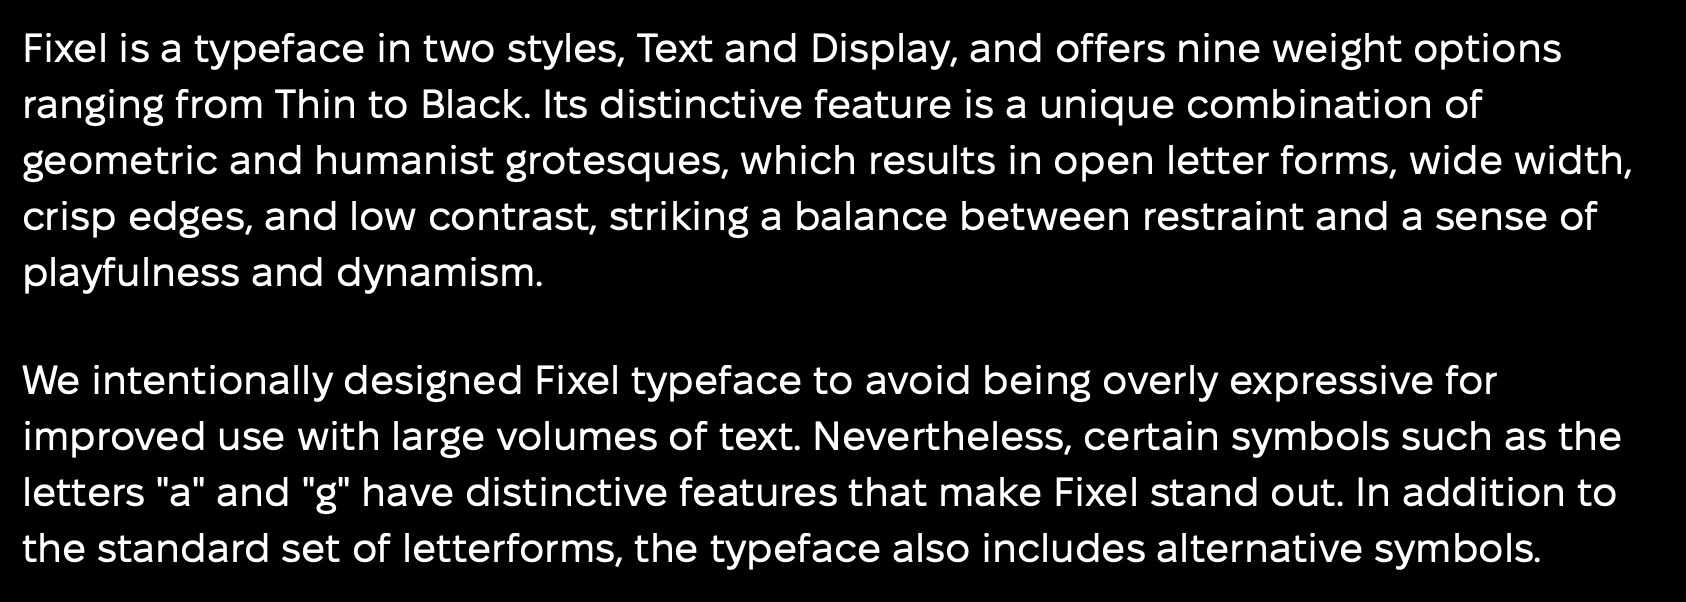 A type sample of Fixel, stating: Fixel is a typeface in two styles, Text and Display, and offers nine weight options ranging from Thin to Black. Its distinctive feature is a unique combination of geometric and humanist grotesques, which results in open letter forms, wide width, crisp edges, and low contrast, striking a balance between restraint and a sense of playfulness and dynamism. We intentionally designed Fixel typeface to avoid being overly expressive for improved use with large volumes of text. Nevertheless, certain symbols such as the letters 